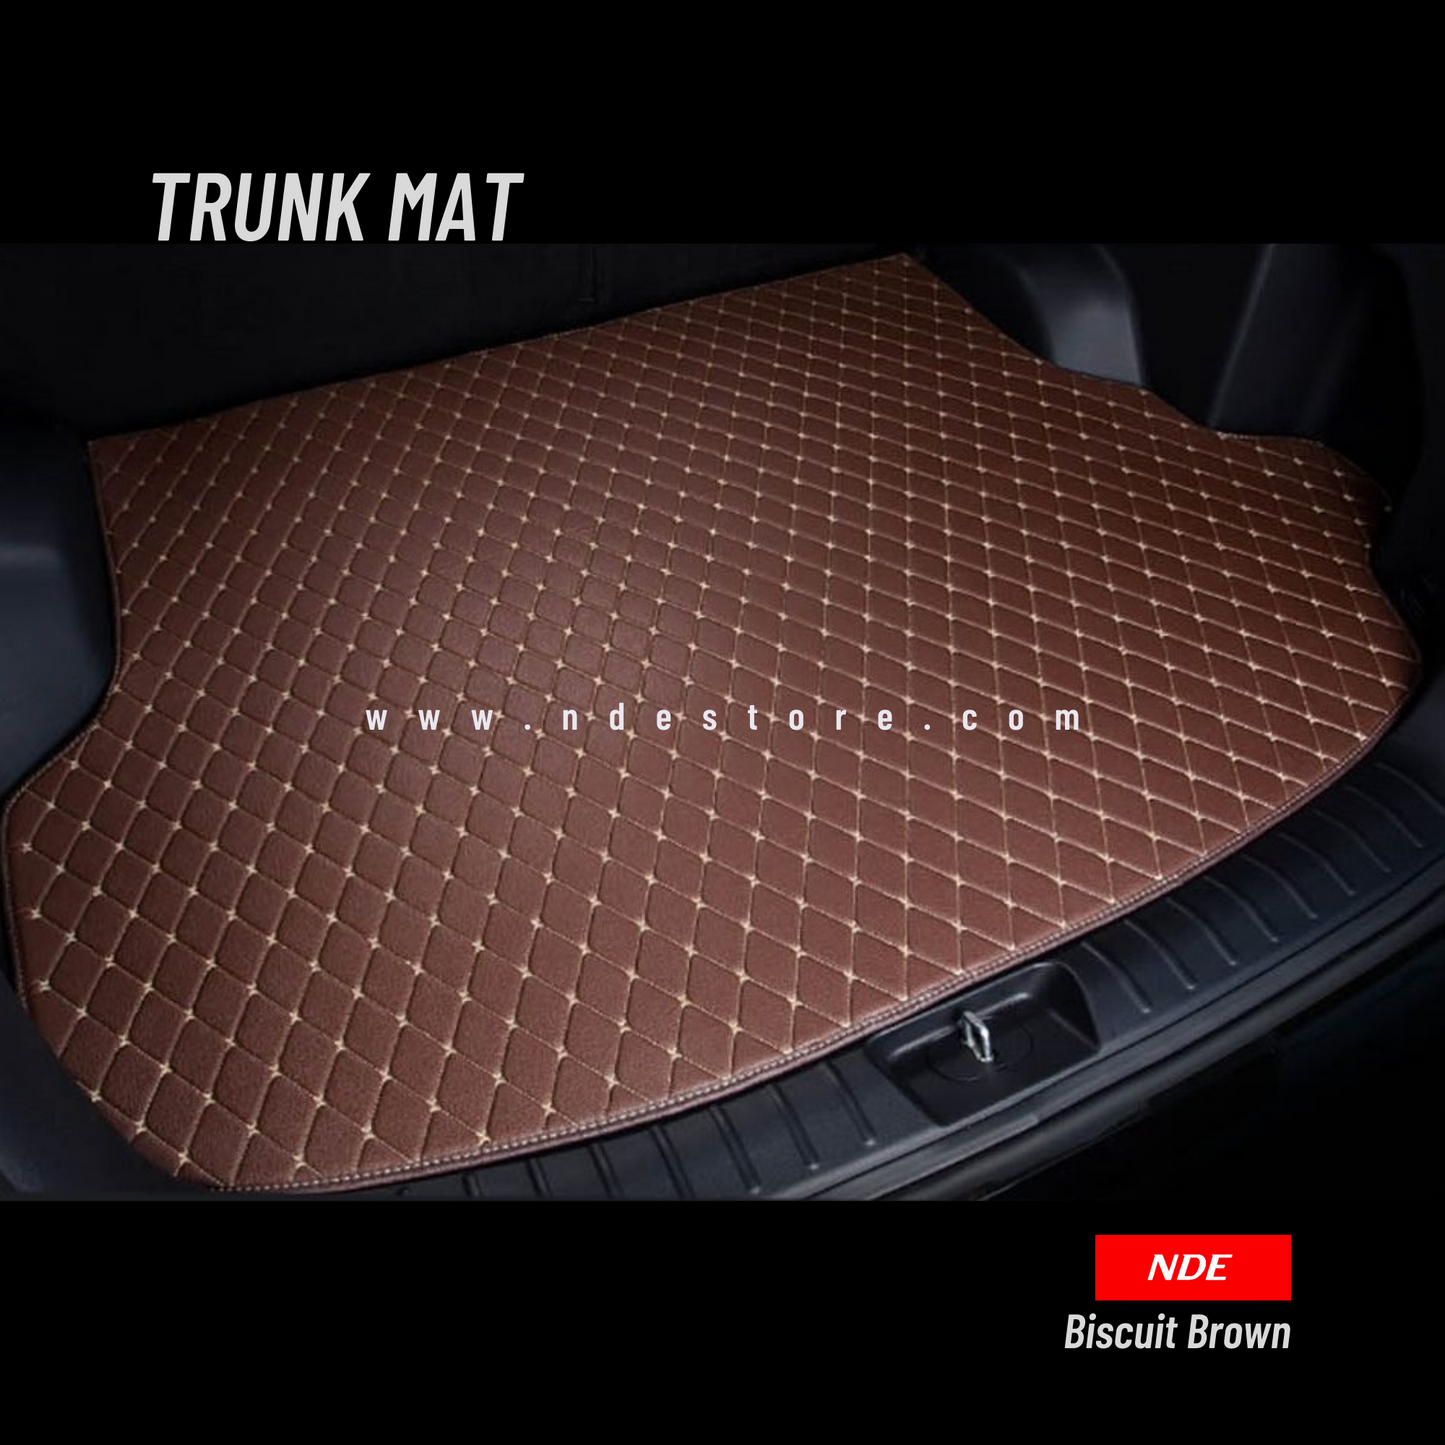 TRUNK MAT 7D STYLE FOR TOYOTA YARIS